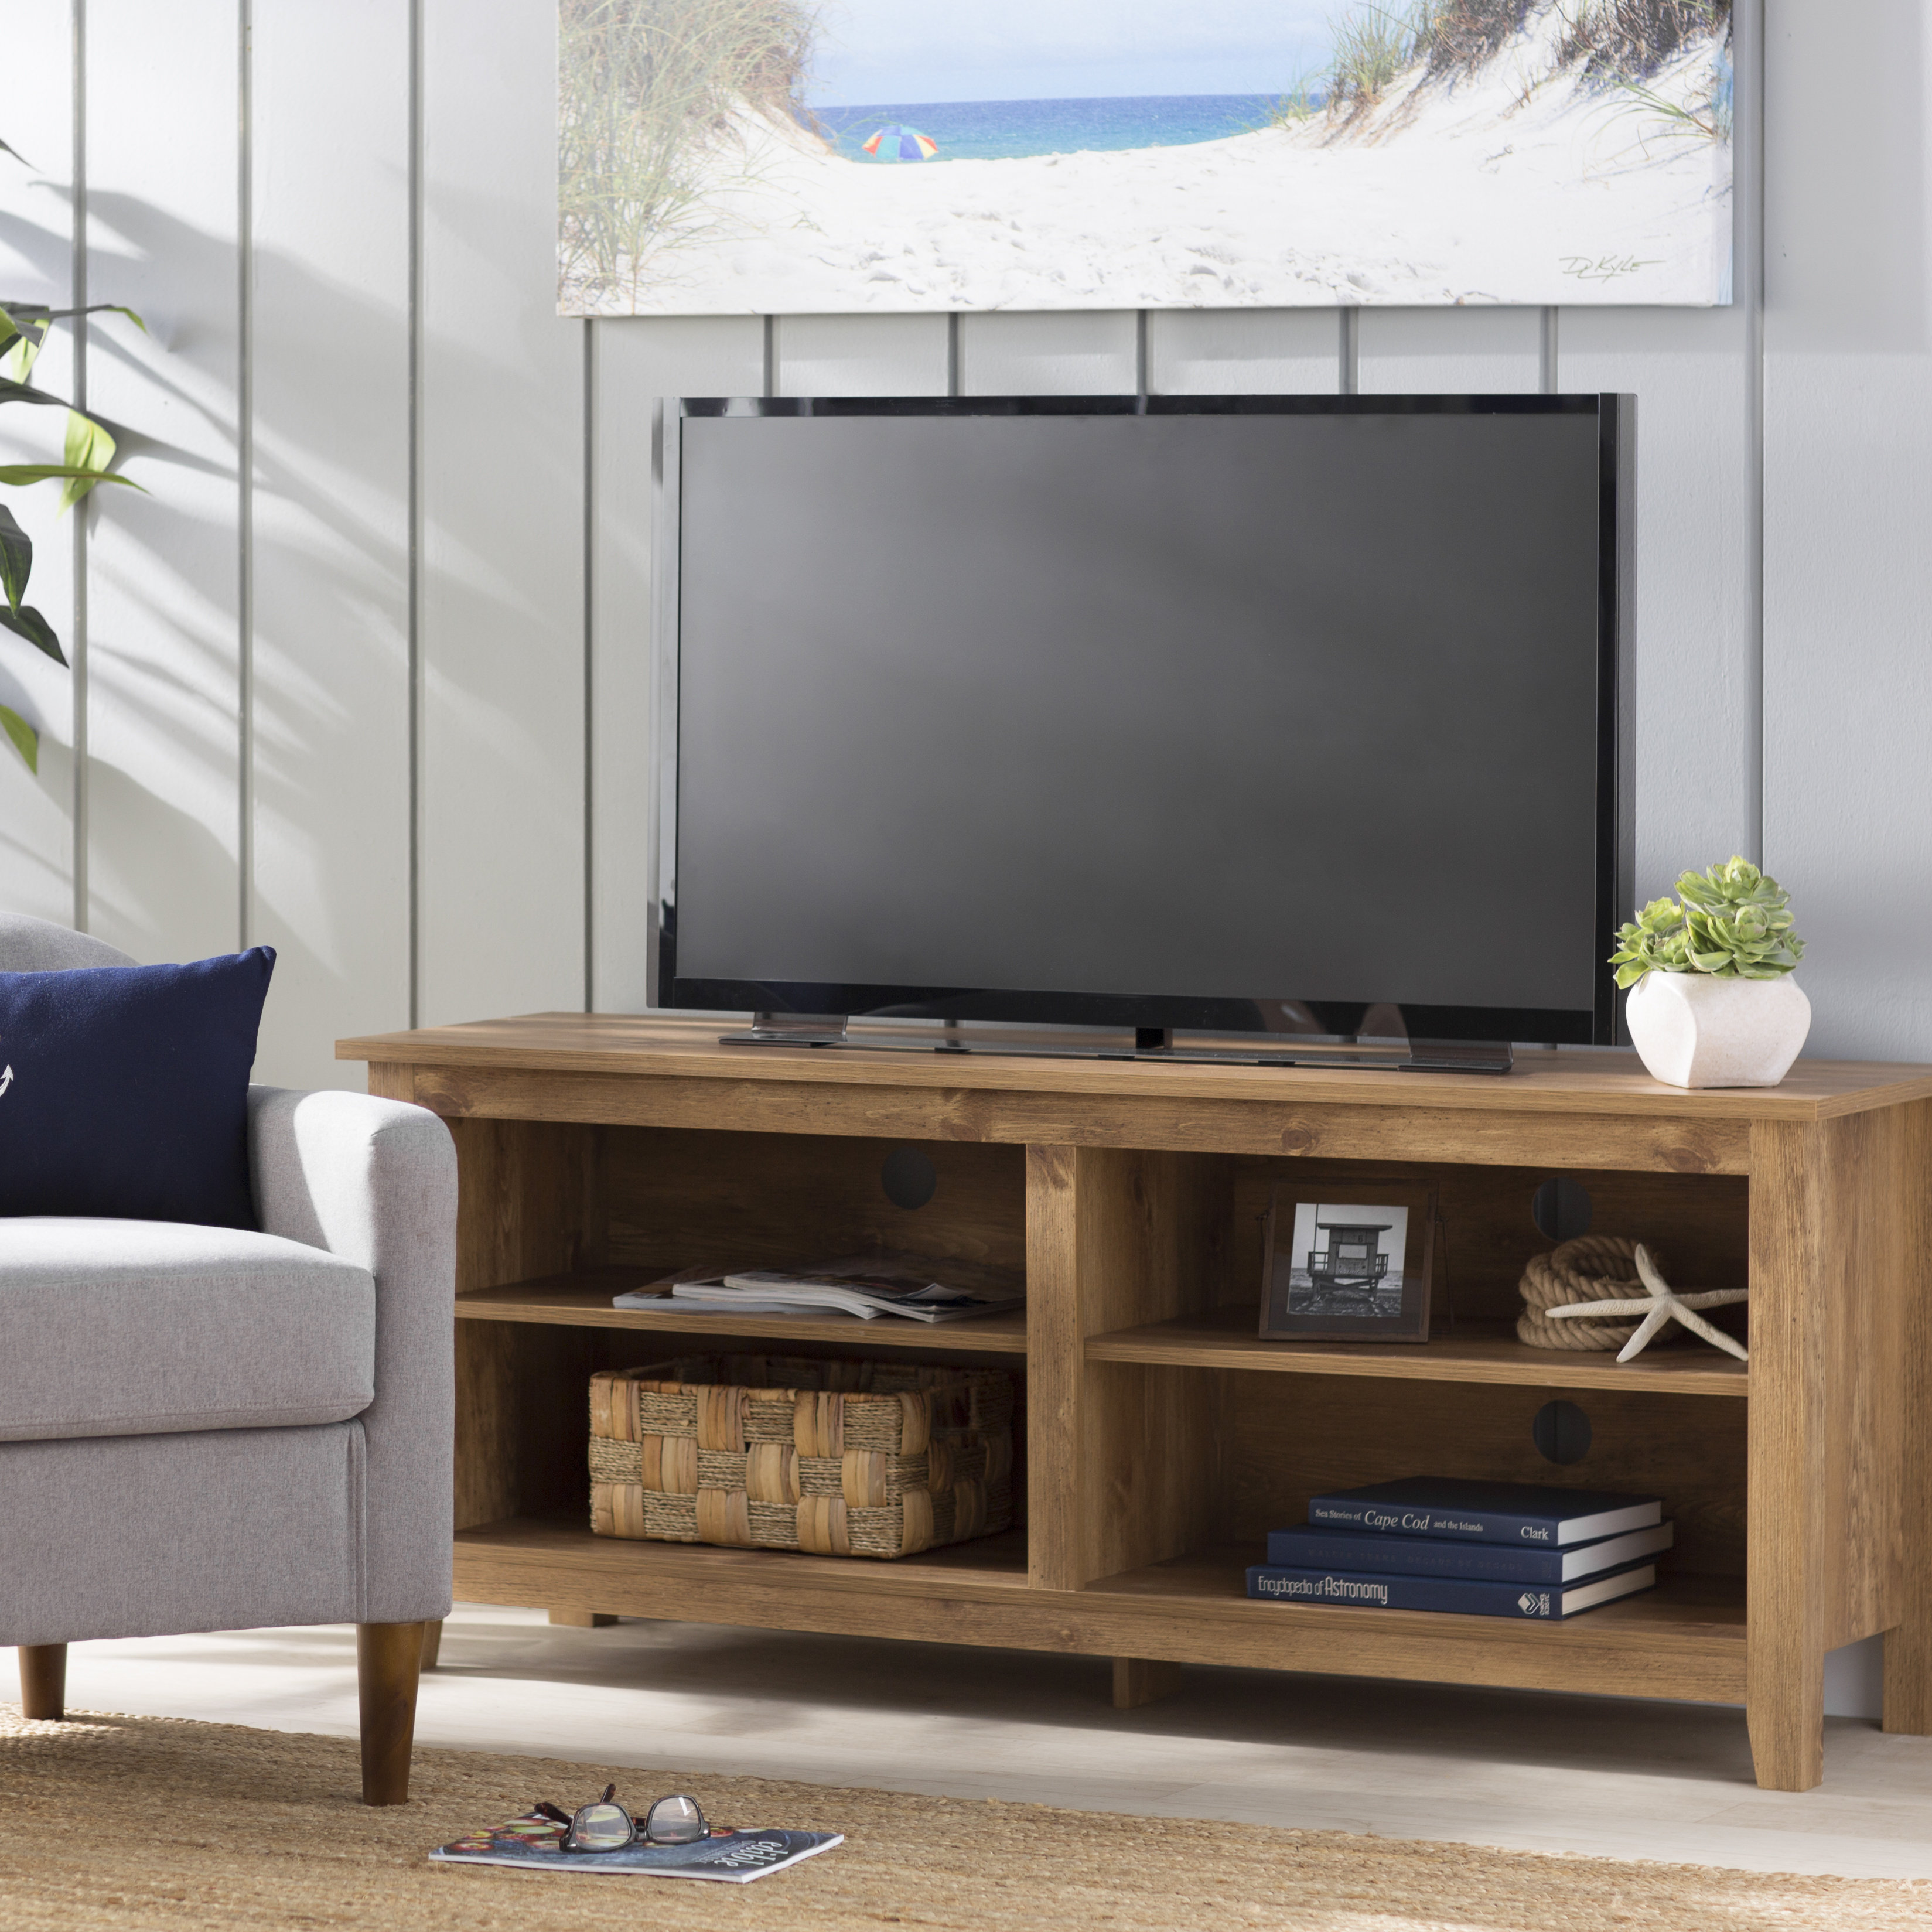 Details about   TV Stand Entertainment Center Furniture Media Storage Shelf Modern Home Table US 